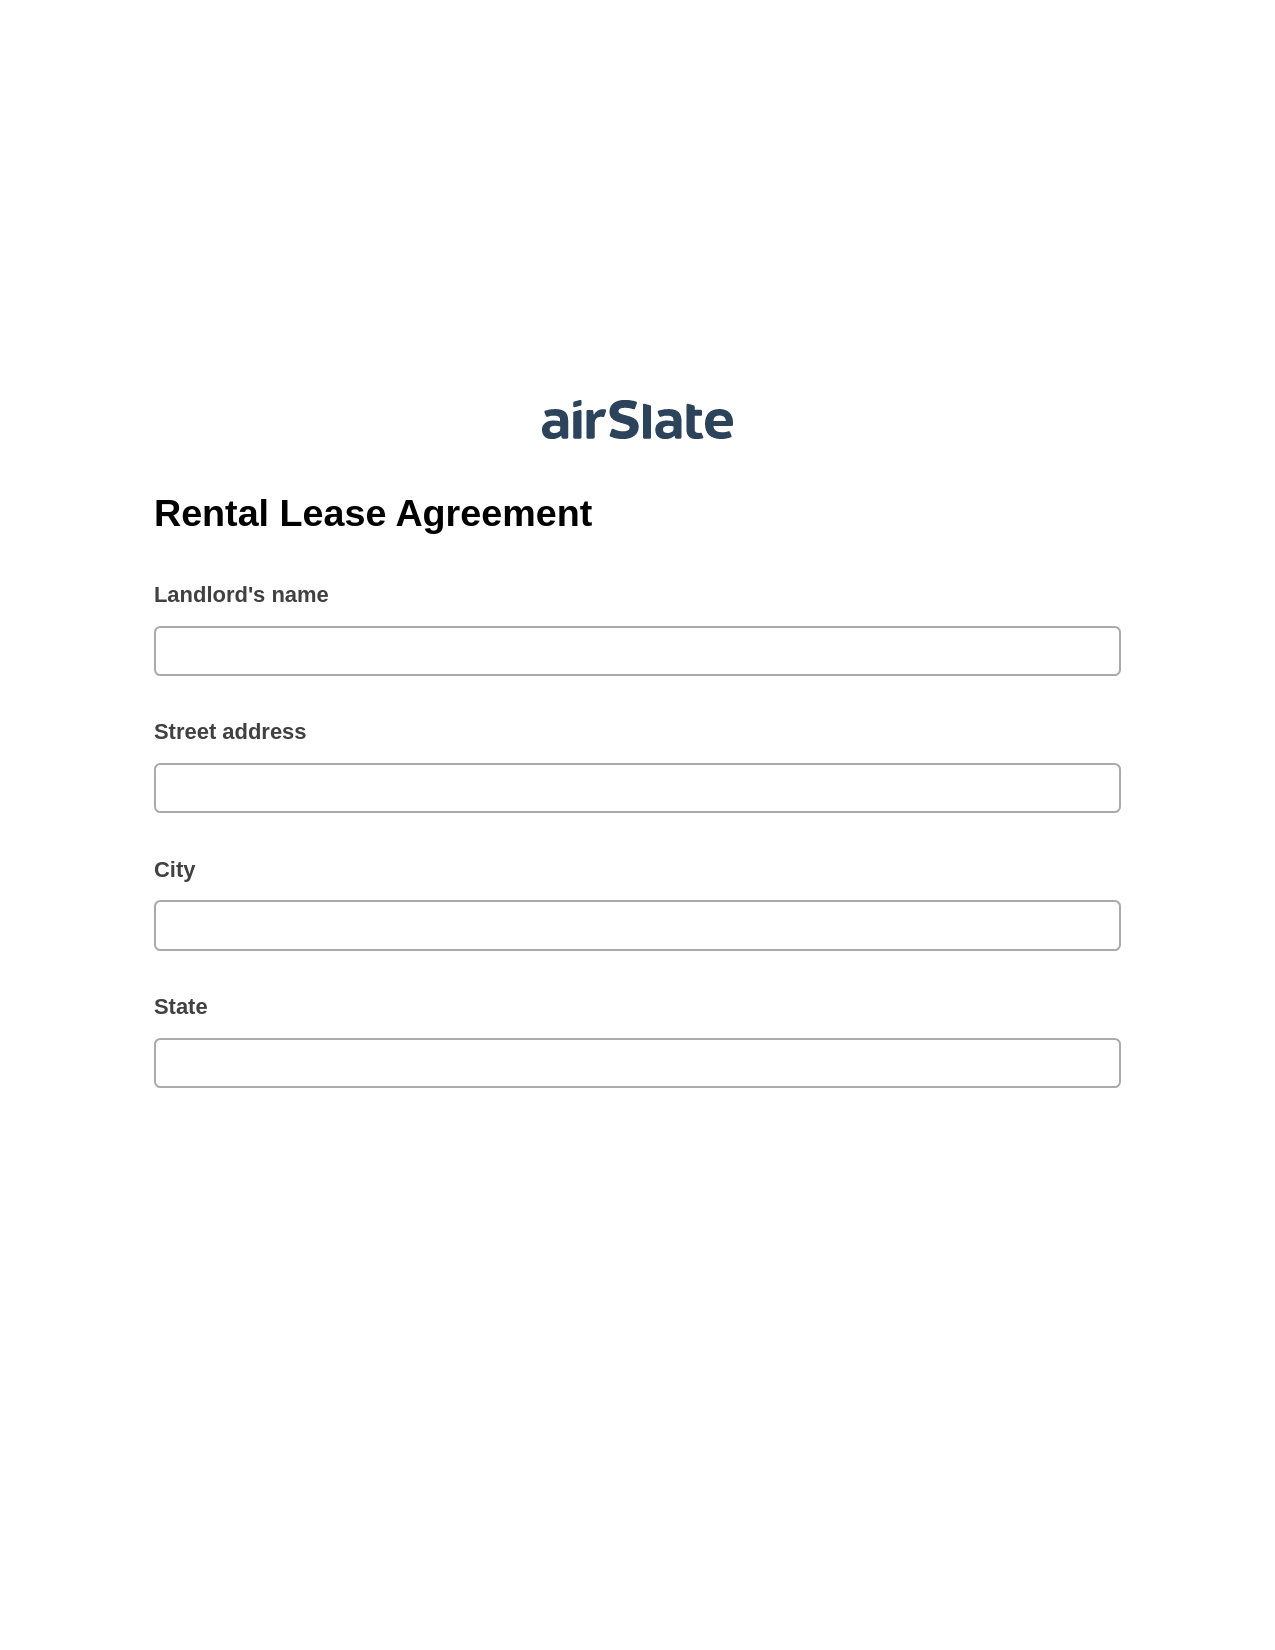 Rental Lease Agreement Pre-fill Document Bot, Document Hide Bot, Export to Formstack Documents Bot